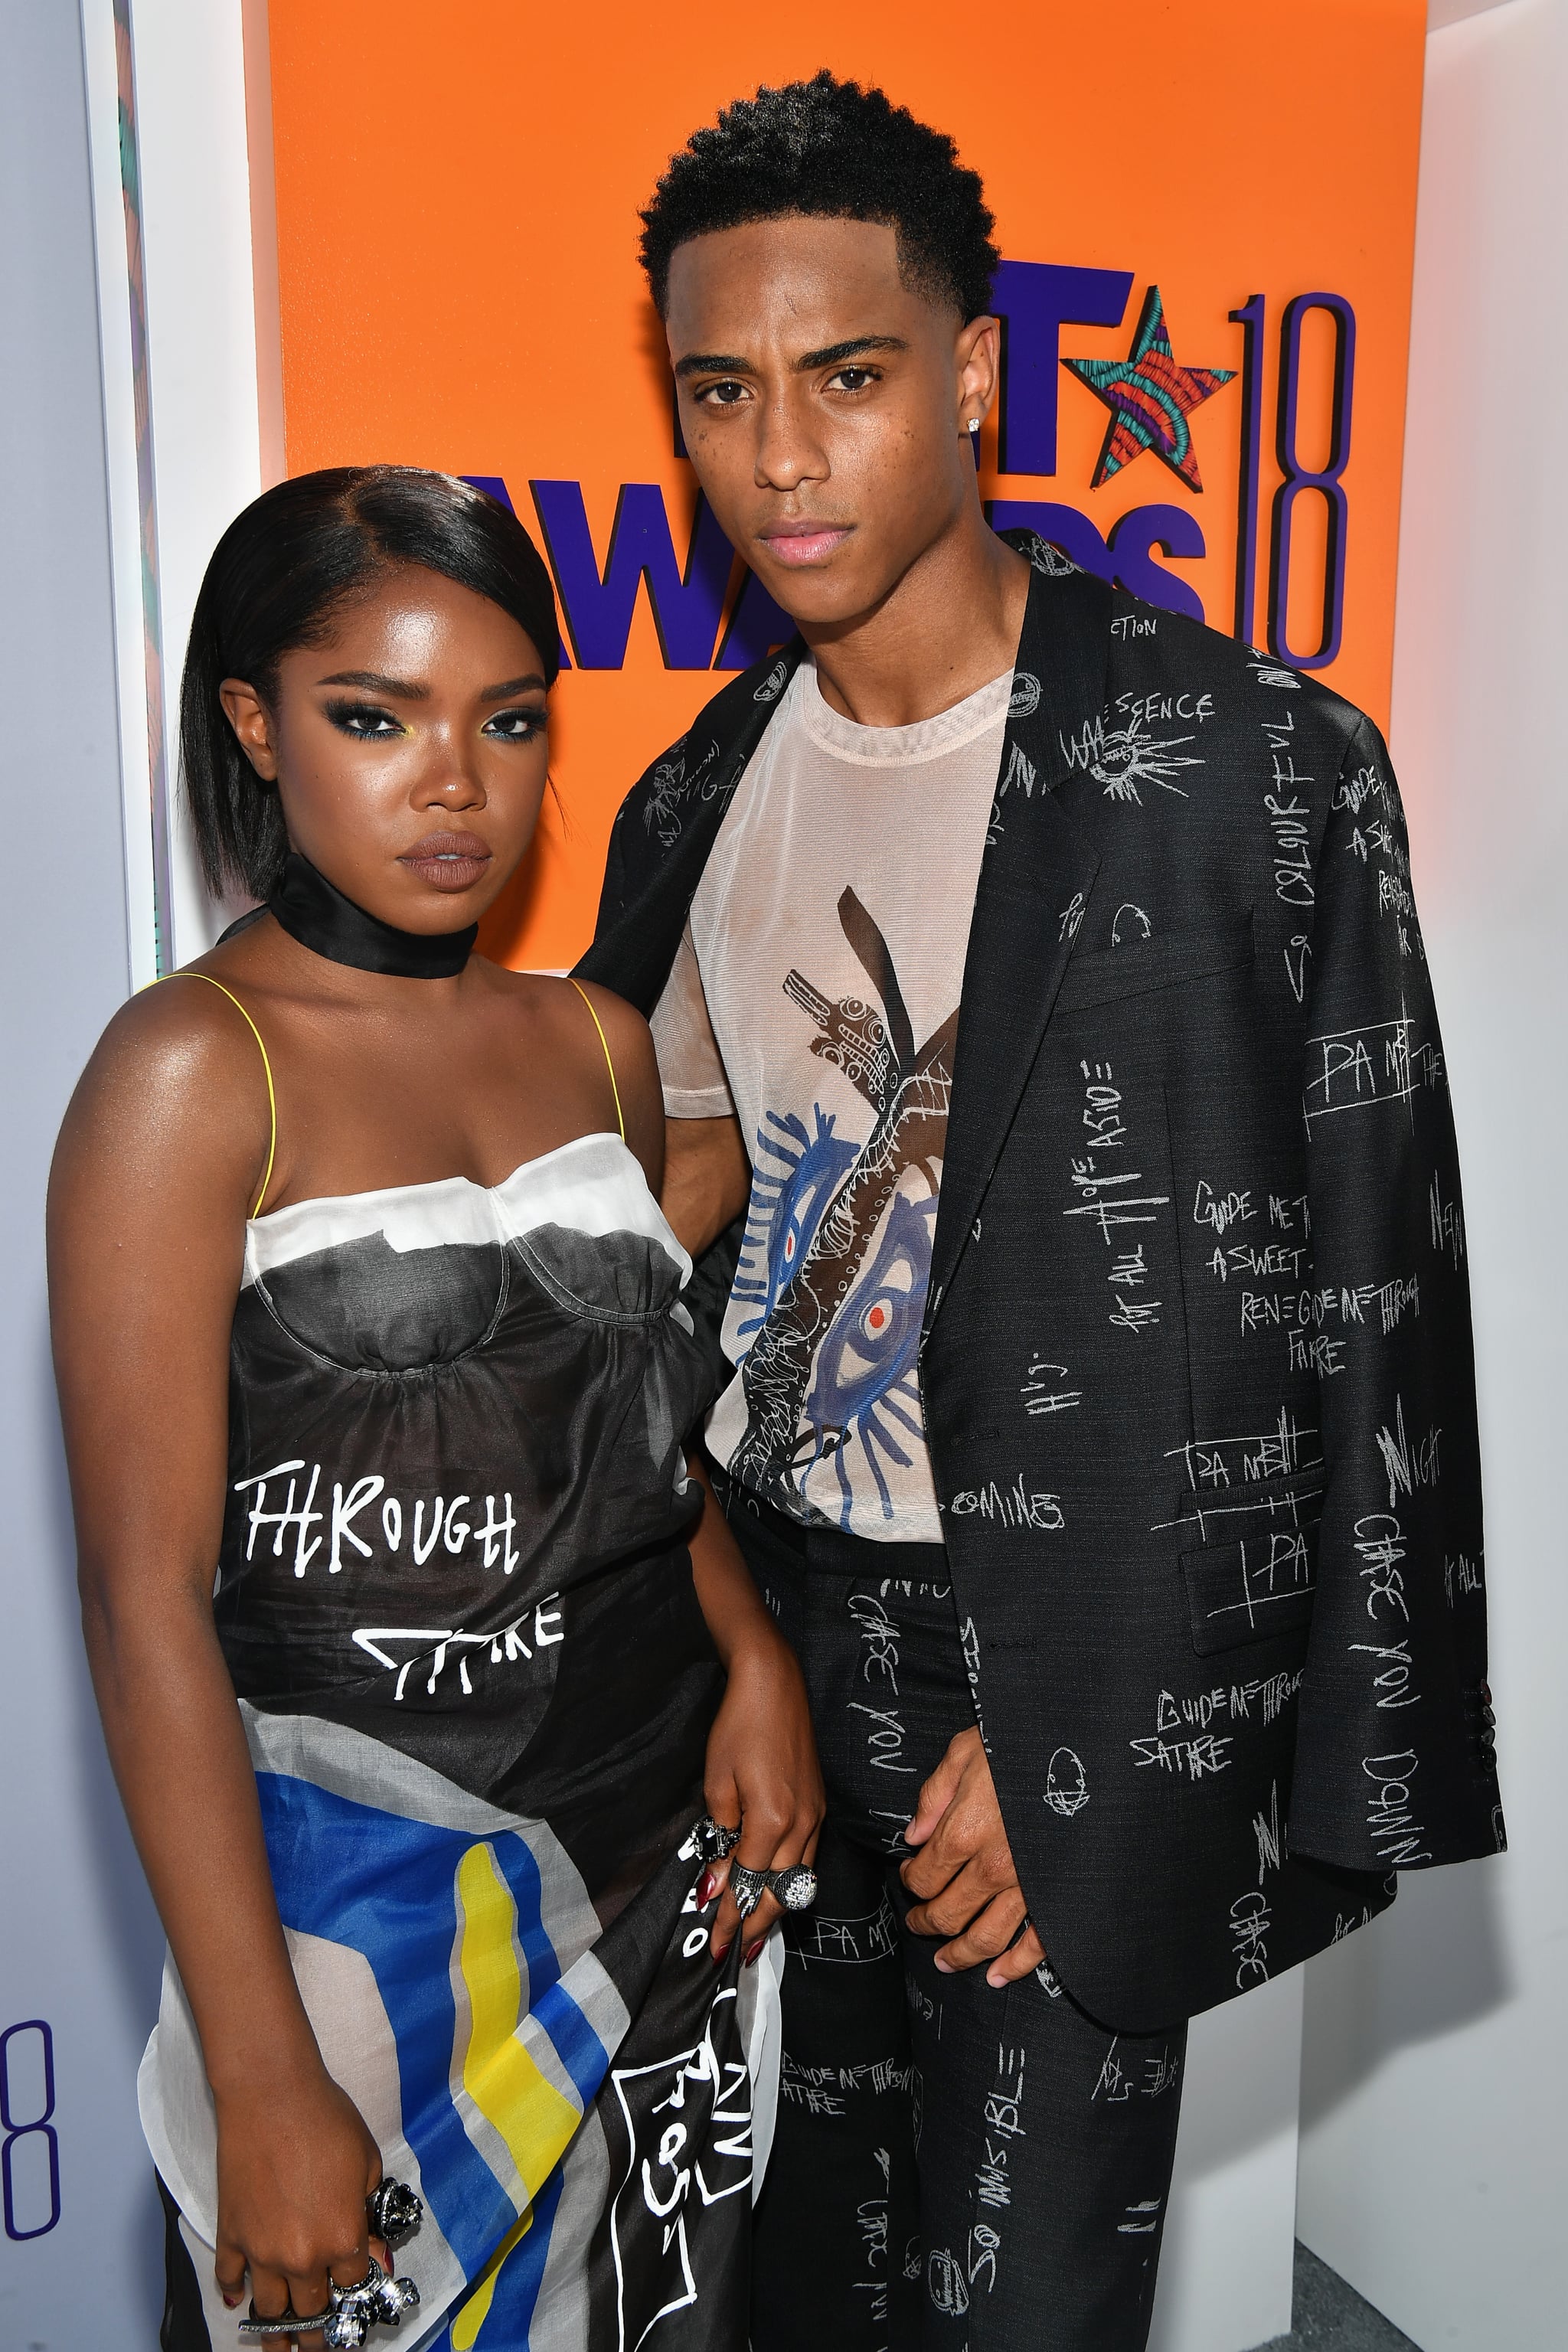 LOS ANGELES, CA - JUNE 24:  Ryan Destiny (L) and Keith Powers (R) attend the 2018 BET Awards at Microsoft Theater on June 24, 2018 in Los Angeles, California.  (Photo by Paras Griffin/VMN18/Getty Images for BET)